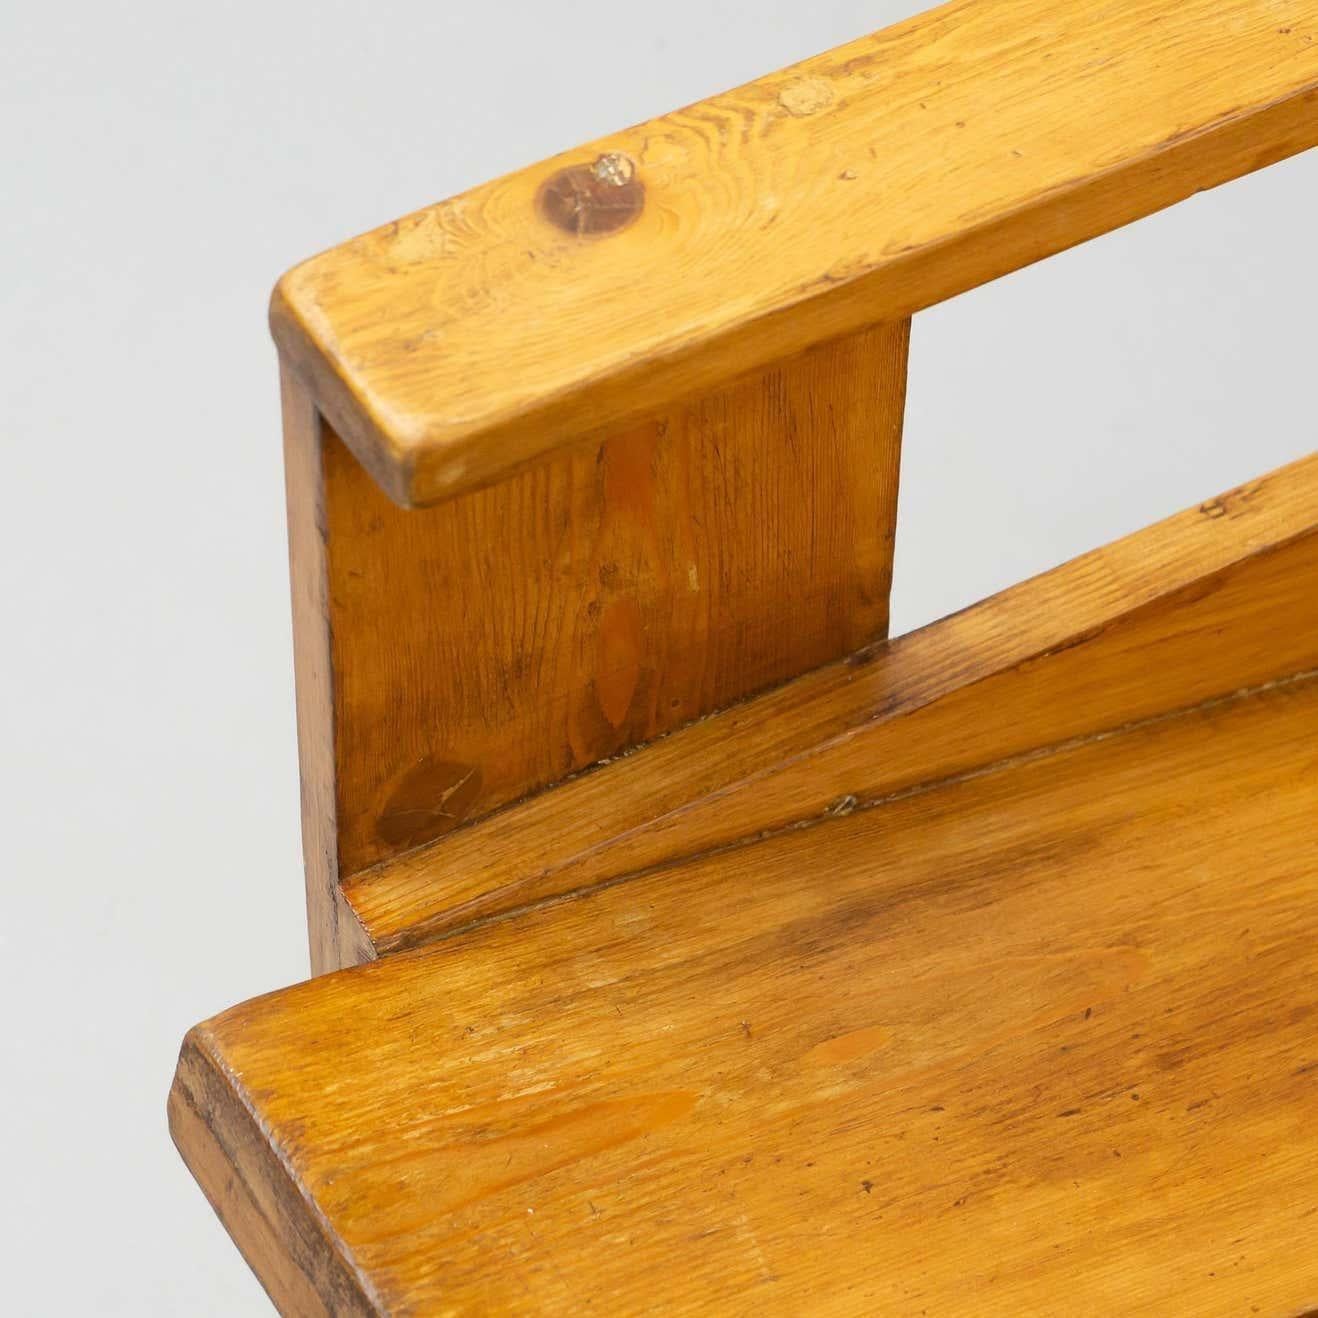 Gerrit Rietveld Mid-Century Modern Wood Crate Chair, circa 1950 For Sale 3